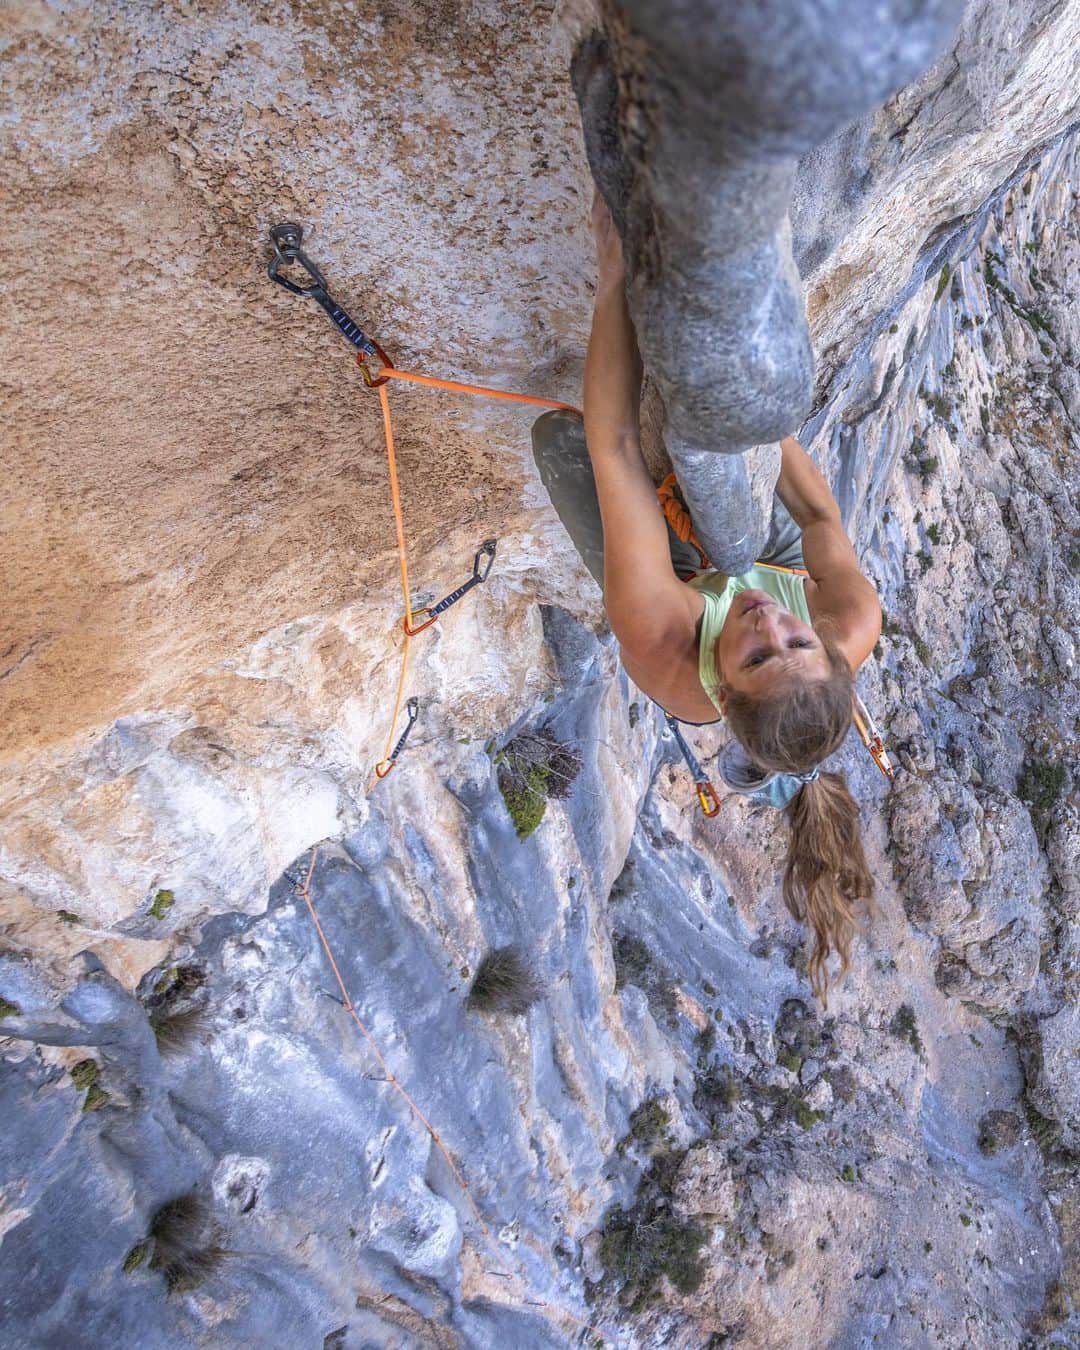 シャーロット・デュリフのインスタグラム：「700 and counting, 8a+, Kyparissi, Greece   I bolted this route in December 2021 while @joshlrsn @dannyclimbs7 and I had an awesome but rainy trip so we couldn’t really climb. We were bolting in a new sector and I noticed this big tuffa way up above ground, sticking out of a prow feature in the overhang…  I couldn’t resist and bolted it ground up. Sadly, it was wet, and limestone (especially tuffas!) get fragile when it’s soaked up with rain, so I didn’t get to climb in it then.  When we returned in summer 2022 for our wedding, I obviously really wanted to climb it (amongst other undone projects we had bolted), but in parallel I also had my 2022 goal to achieve : climb 17 routes 8a or harder, so I would reach the anecdotic number of 700 throughout my career. When we got to Greece, I had 3 left, and I paced myself to make the 700th special. You guessed it, I picked that big tuffa line to be my project for the 700th. I didn’t know the grade, nor the moves, and I still had to clean it. After two days working on it and making it ready to climb, I clipped the chains, and it was a great moment : it felt challenging enough, it’s a line I bolted during a trip with my favorite person @joshlrsn in one of the best places in the World, my dad was there to belay me, and I could now relax for my wedding happening a few days later 😂  If you haven’t seen it yet, check out the @coldhousemedia « and counting » film of this story (with cool archival footage!) on @epictv or by following the link in my bio !   Photo by @joshlrsn @coldhousemedia   @mountainhardwear @petzl_official @eb_climbing @volxholds」